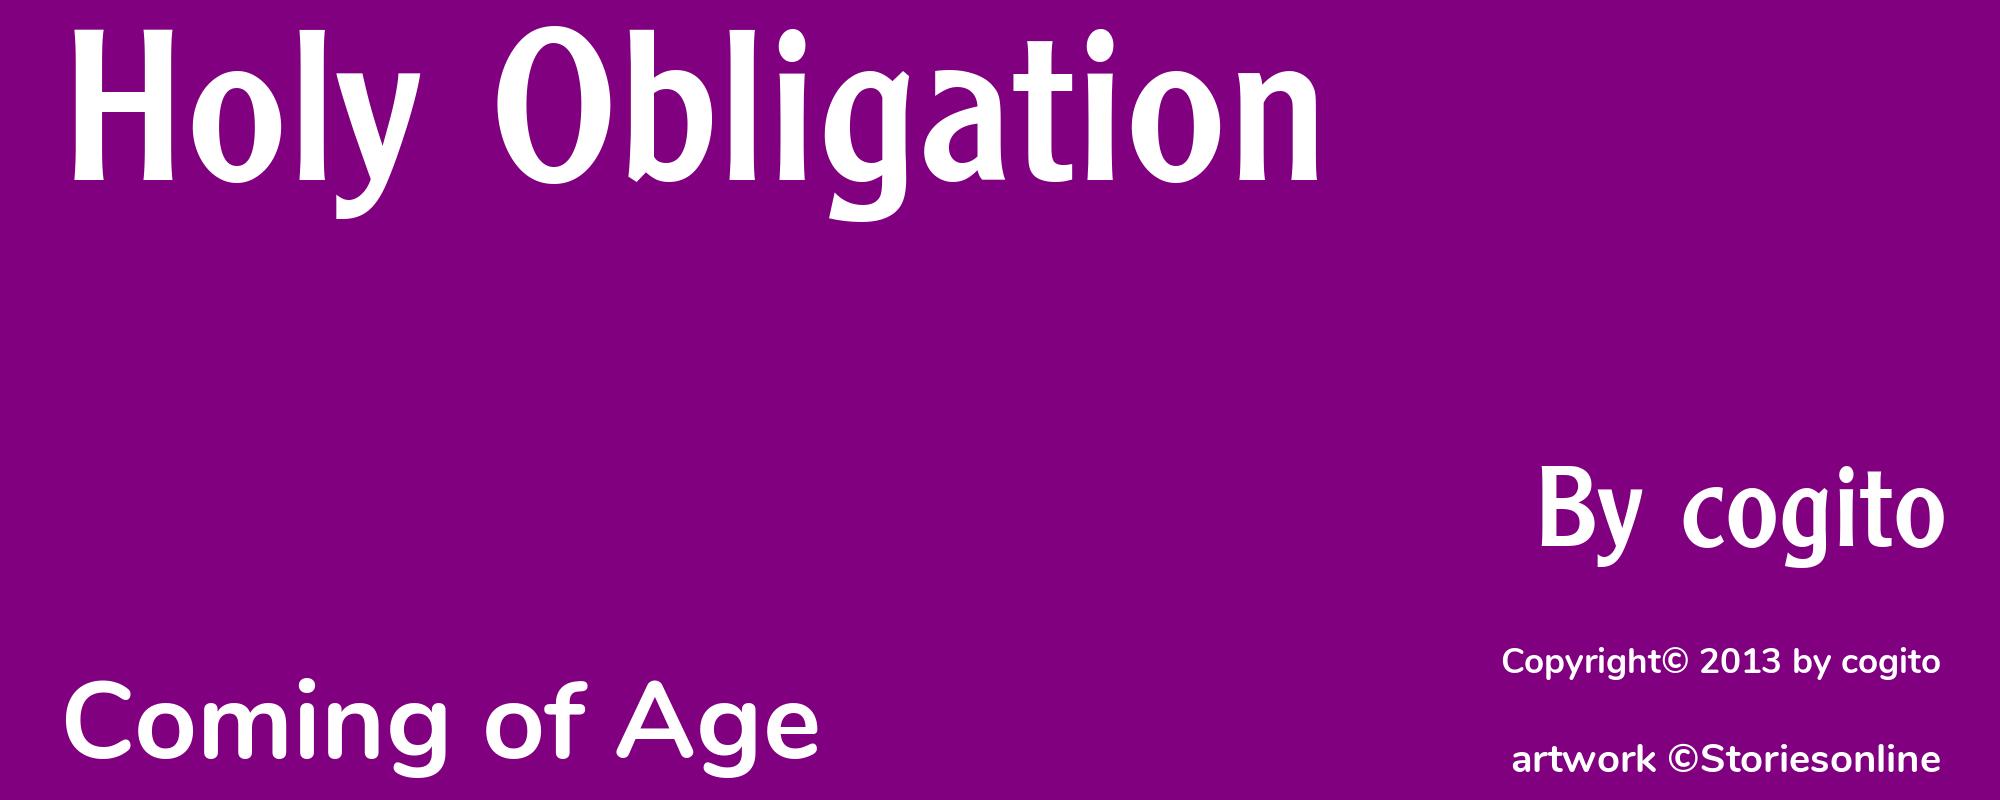 Holy Obligation - Cover